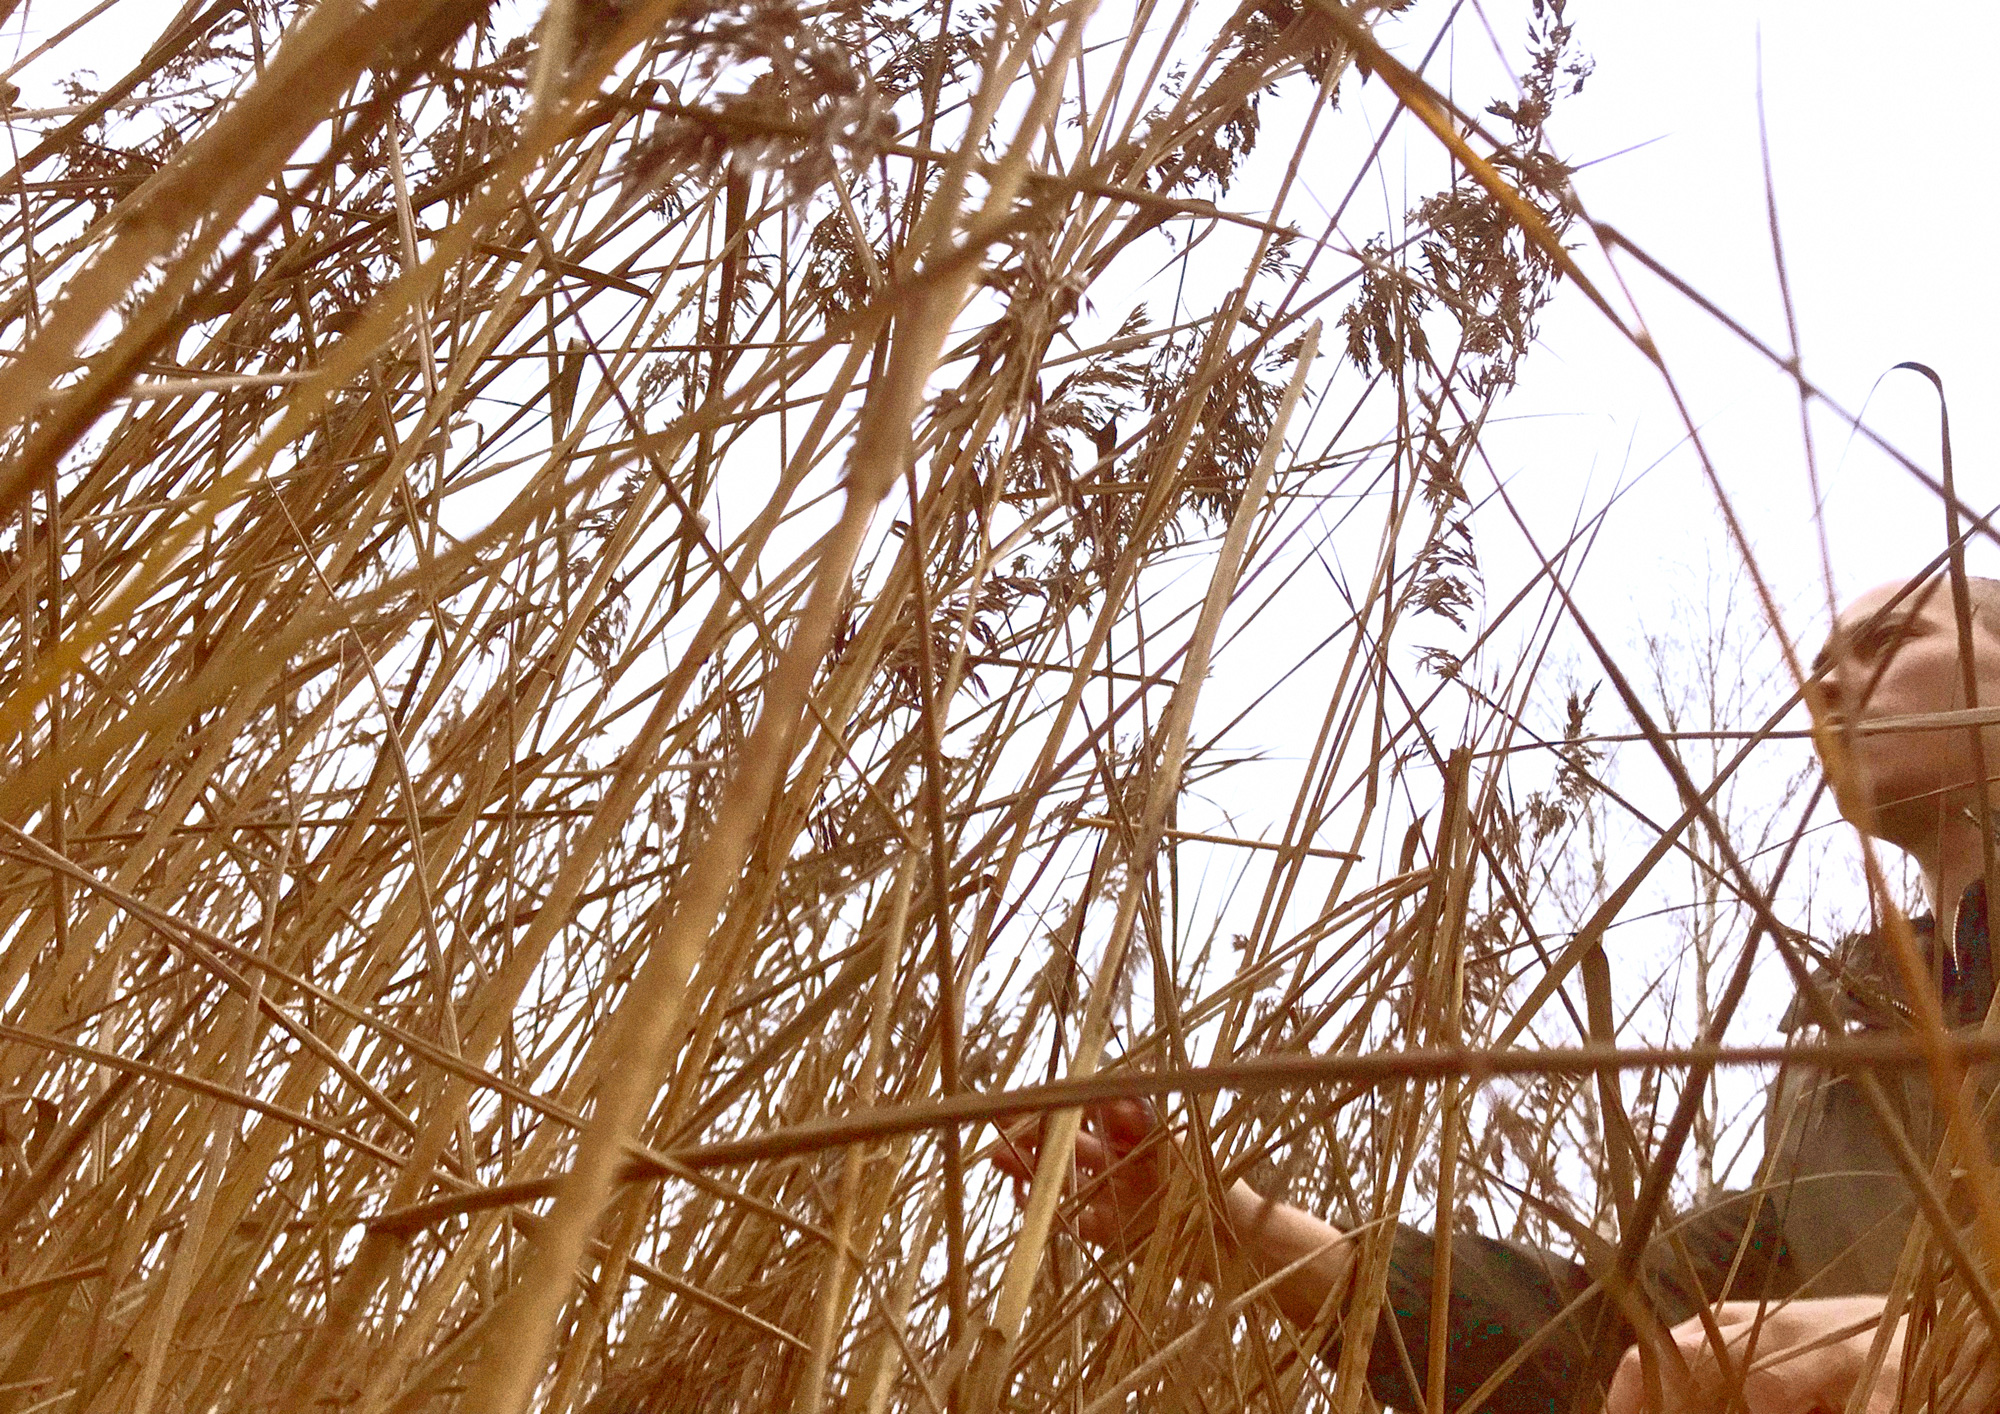 phragmites australis reeds photographed from below. A person with a shaved head is amongst the reeds.